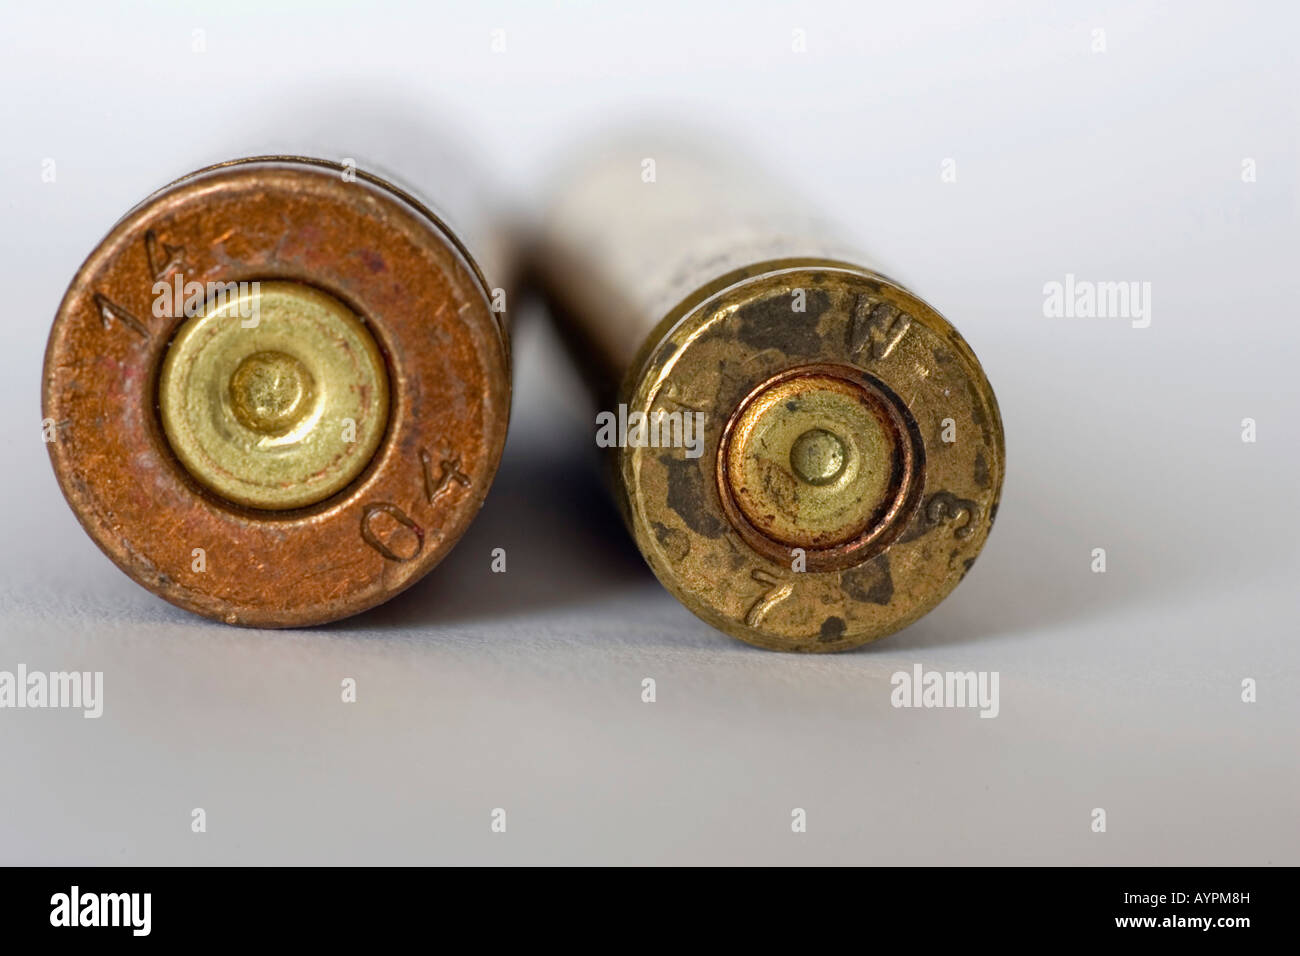 AK-47 and M-16 bullet casings Stock Photo